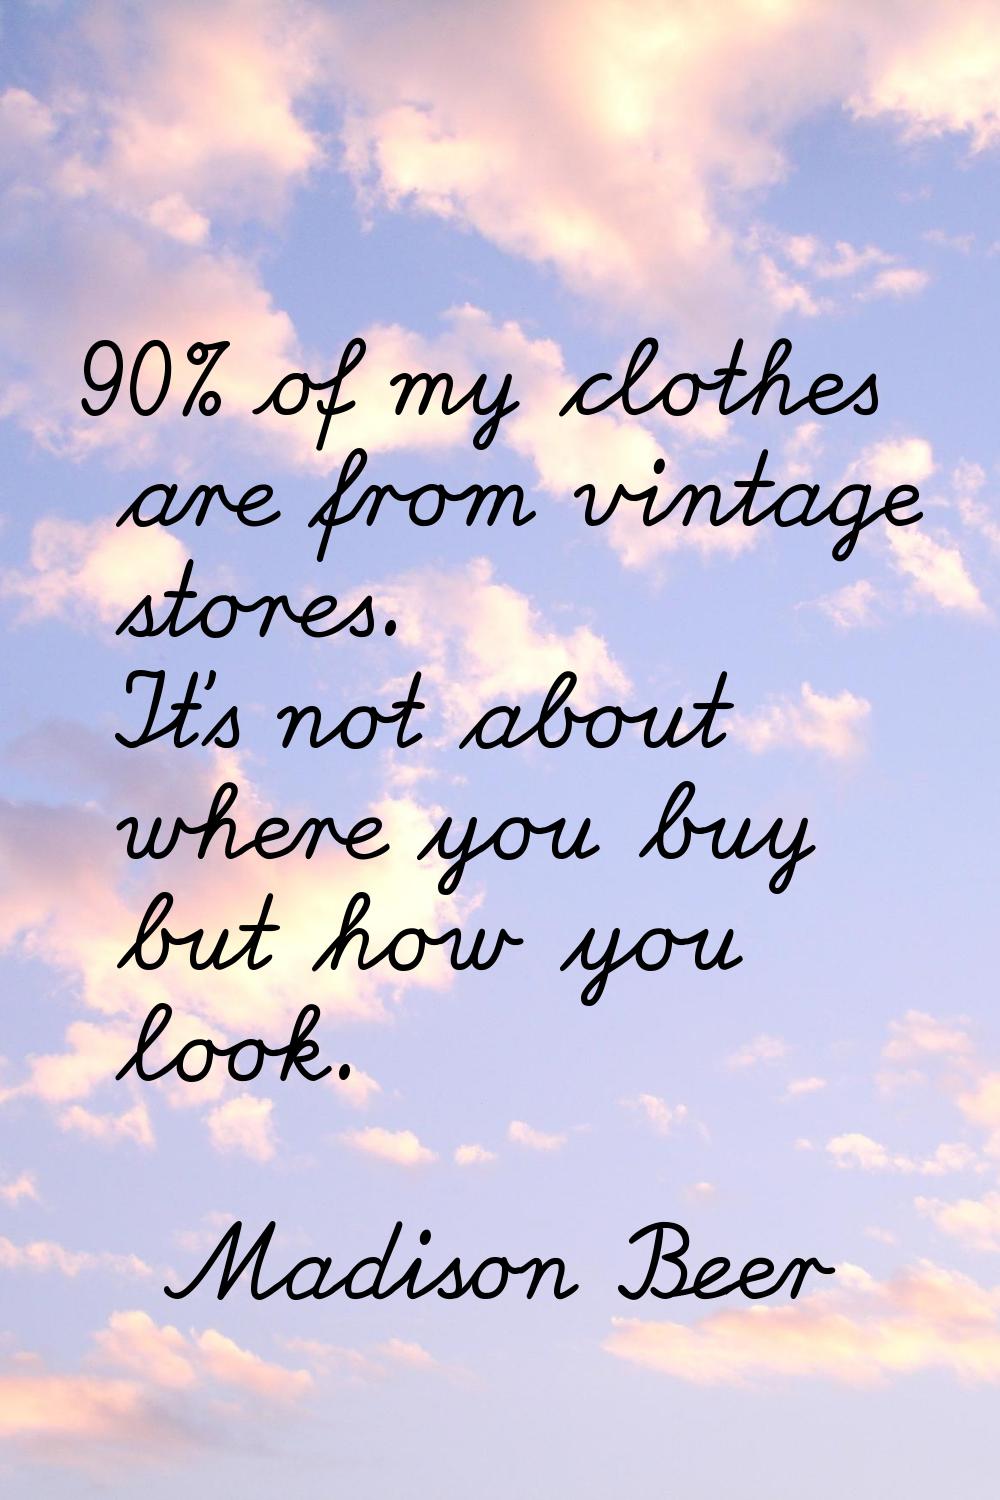 90% of my clothes are from vintage stores. It's not about where you buy but how you look.